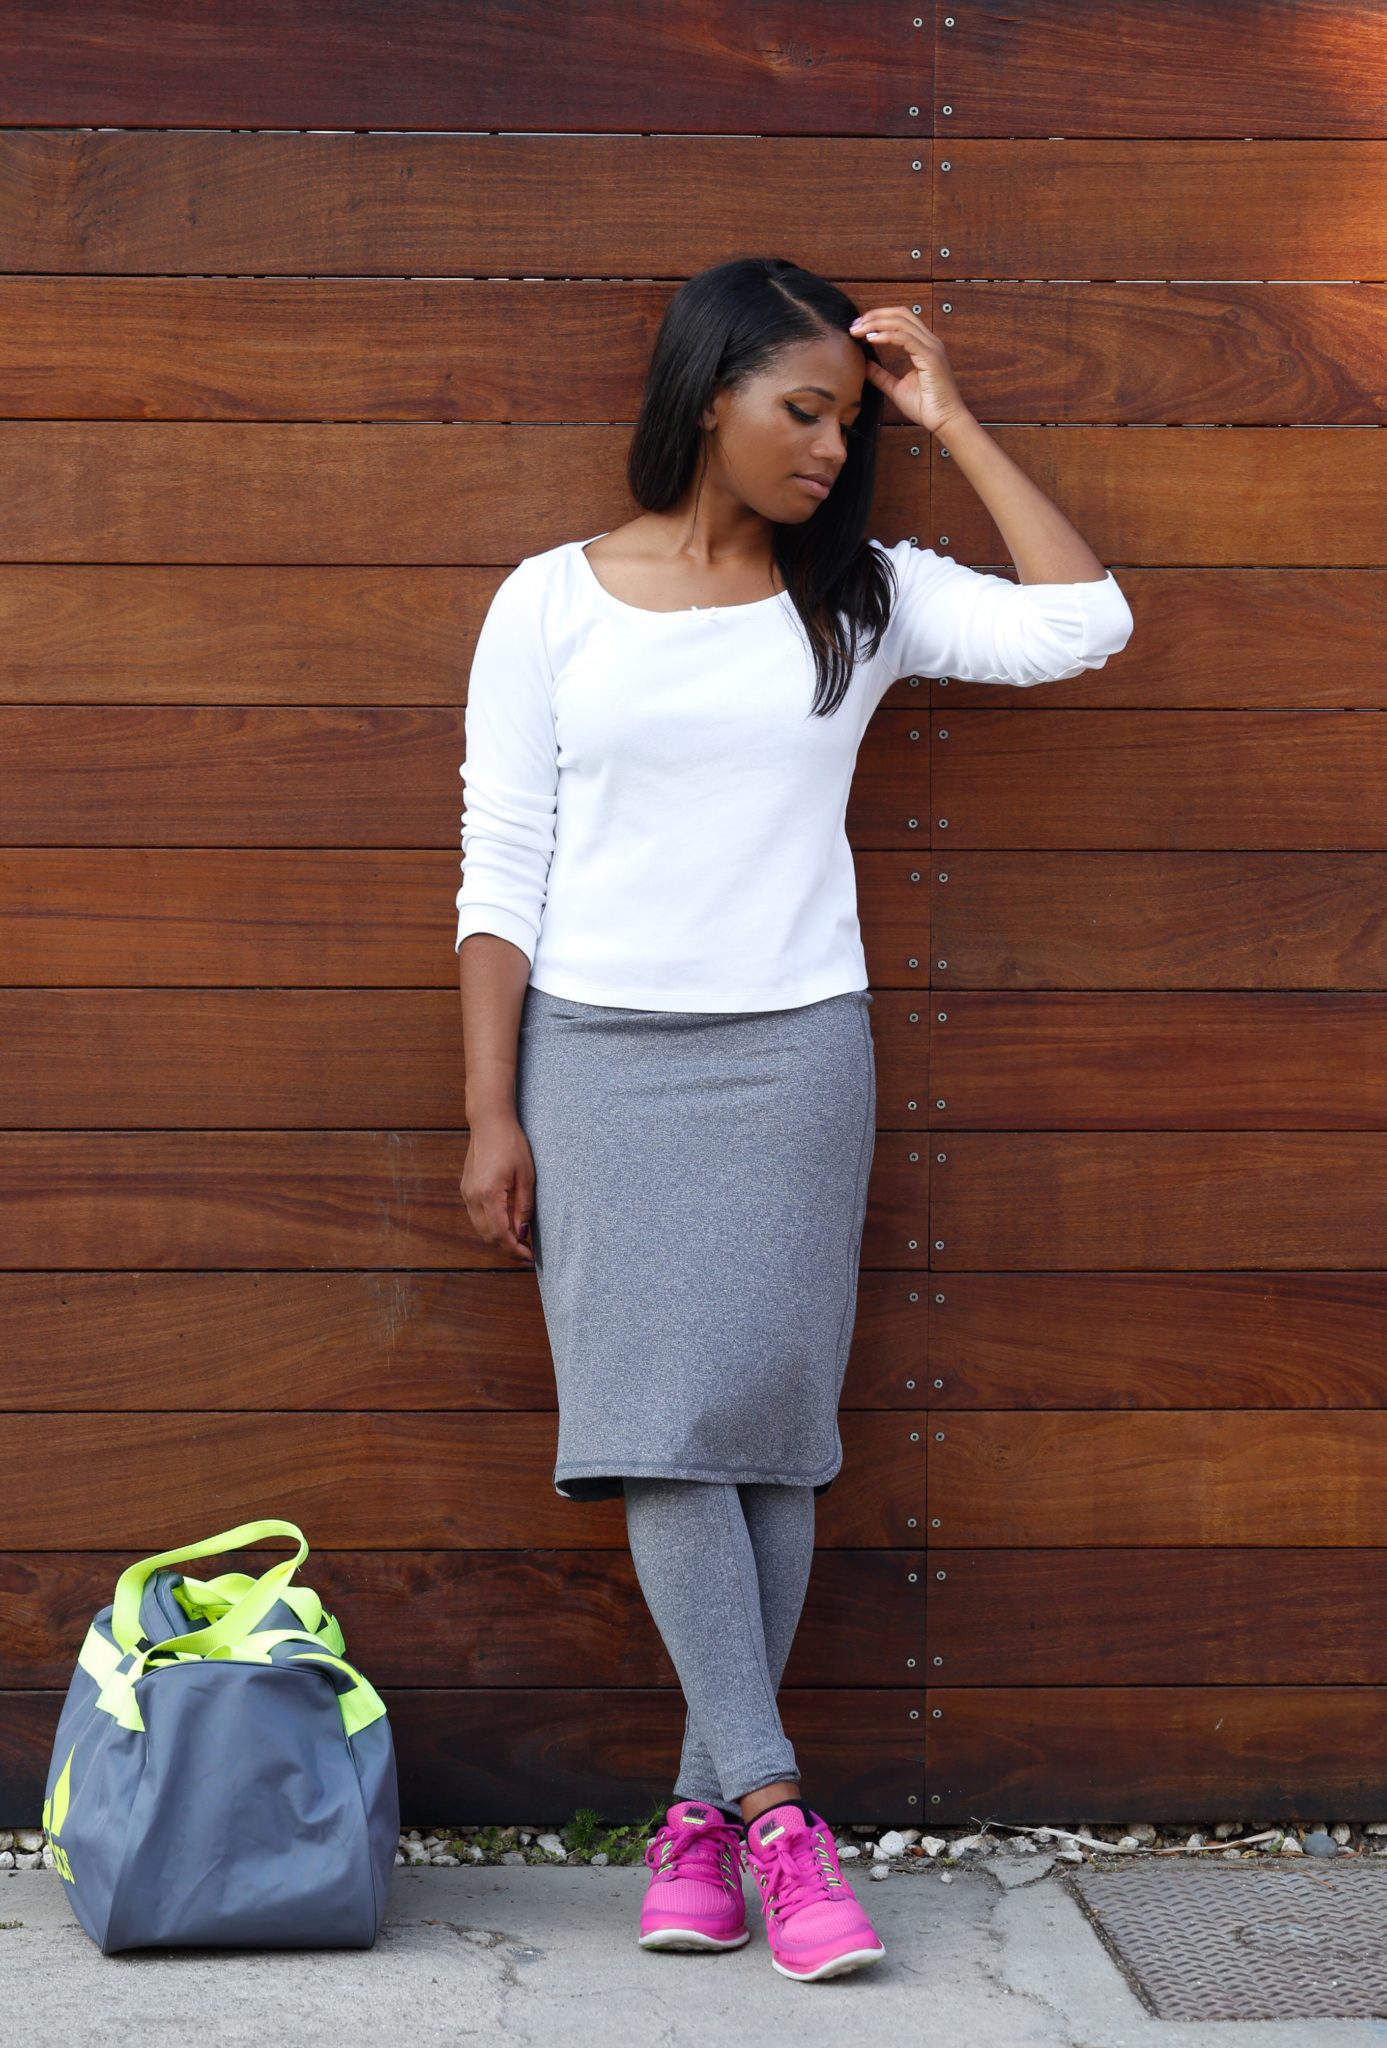 Modest workout skirt from @Snoga review on DowntownDemure.com